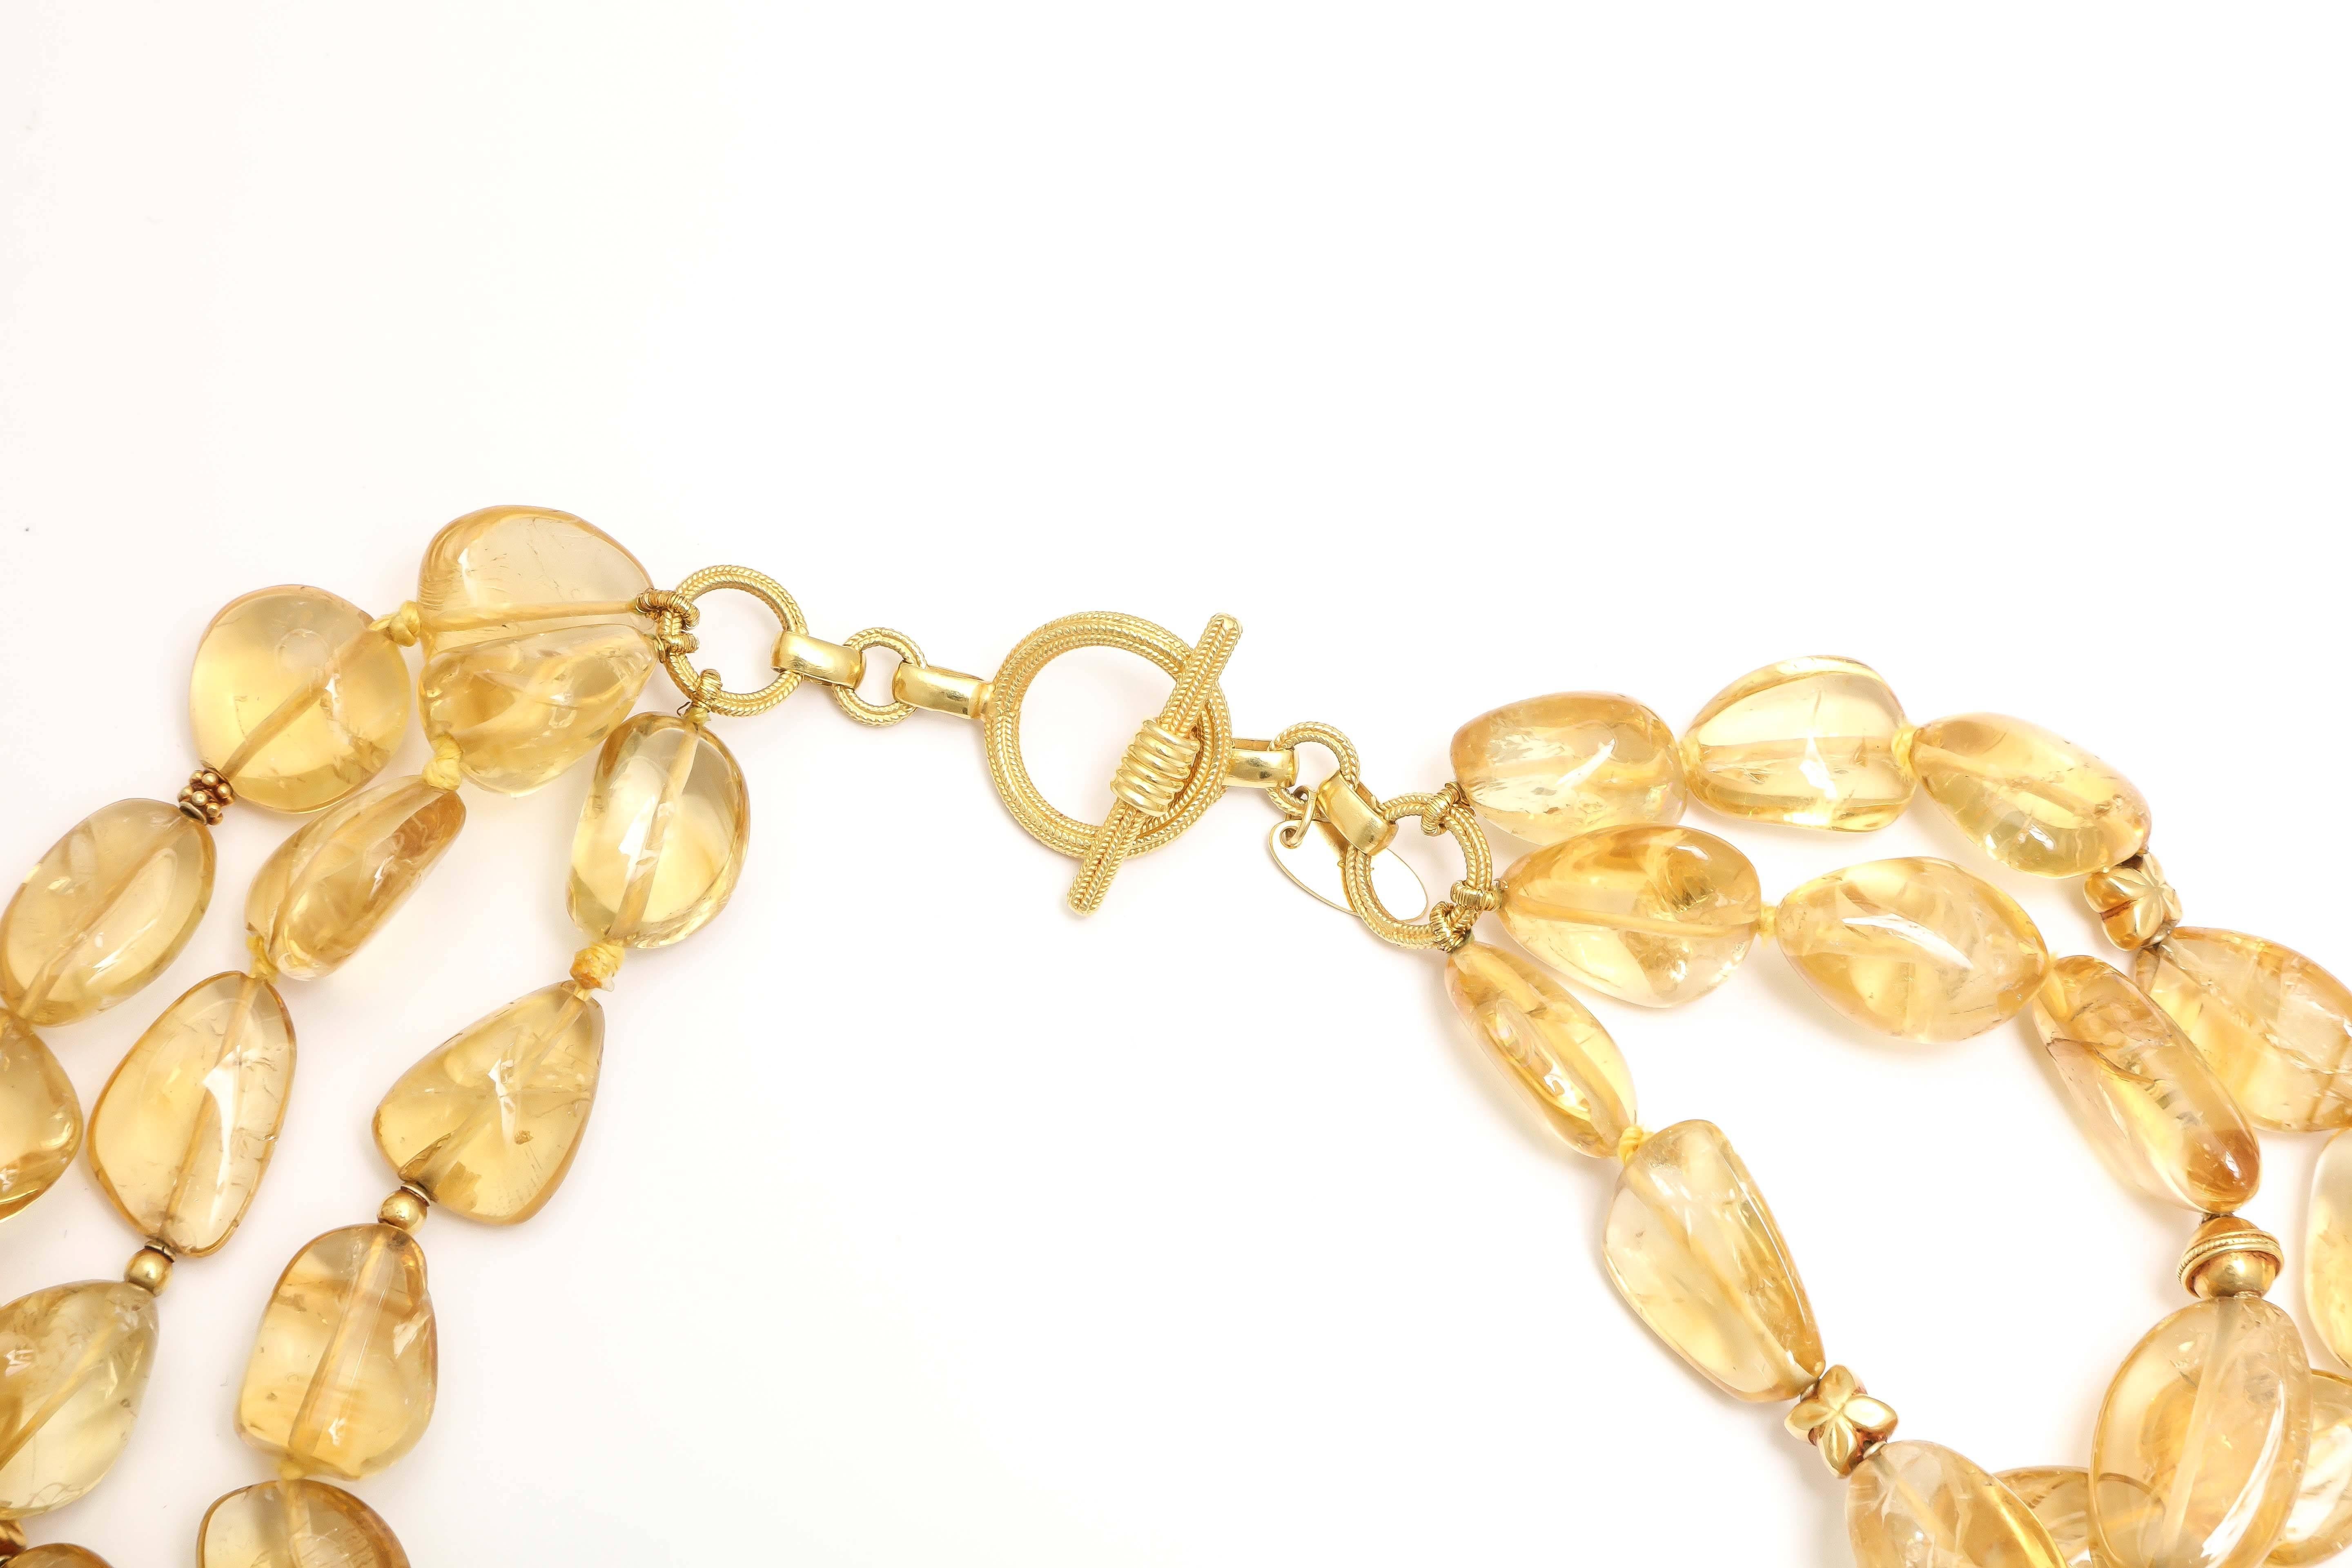 Pat Saling Triple Strand Citrine Gold Bead Necklace In Excellent Condition For Sale In New York, NY